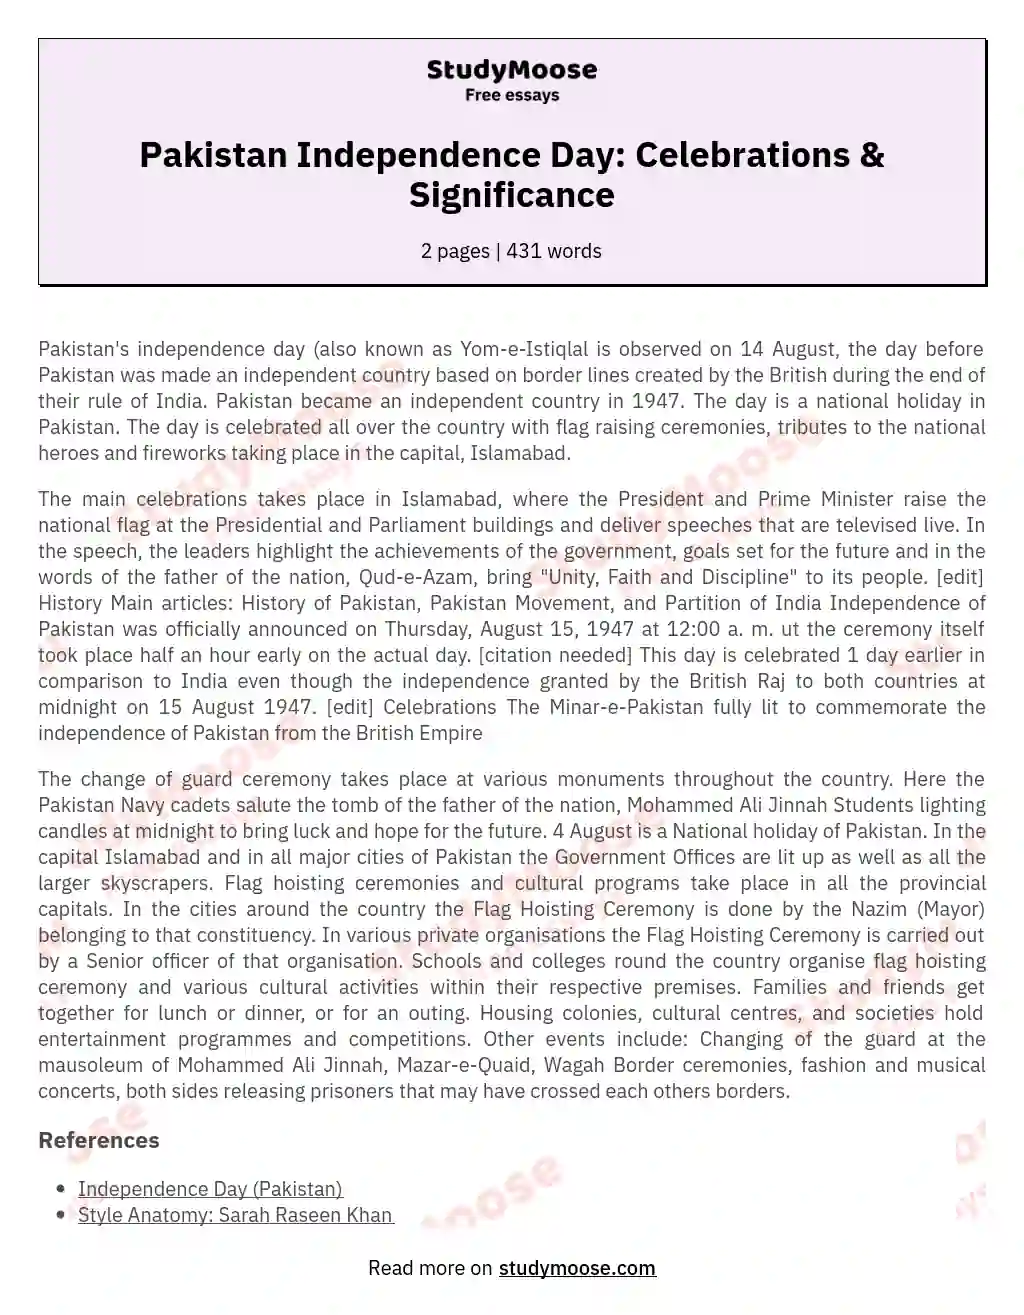 Pakistan Independence Day: Celebrations & Significance essay